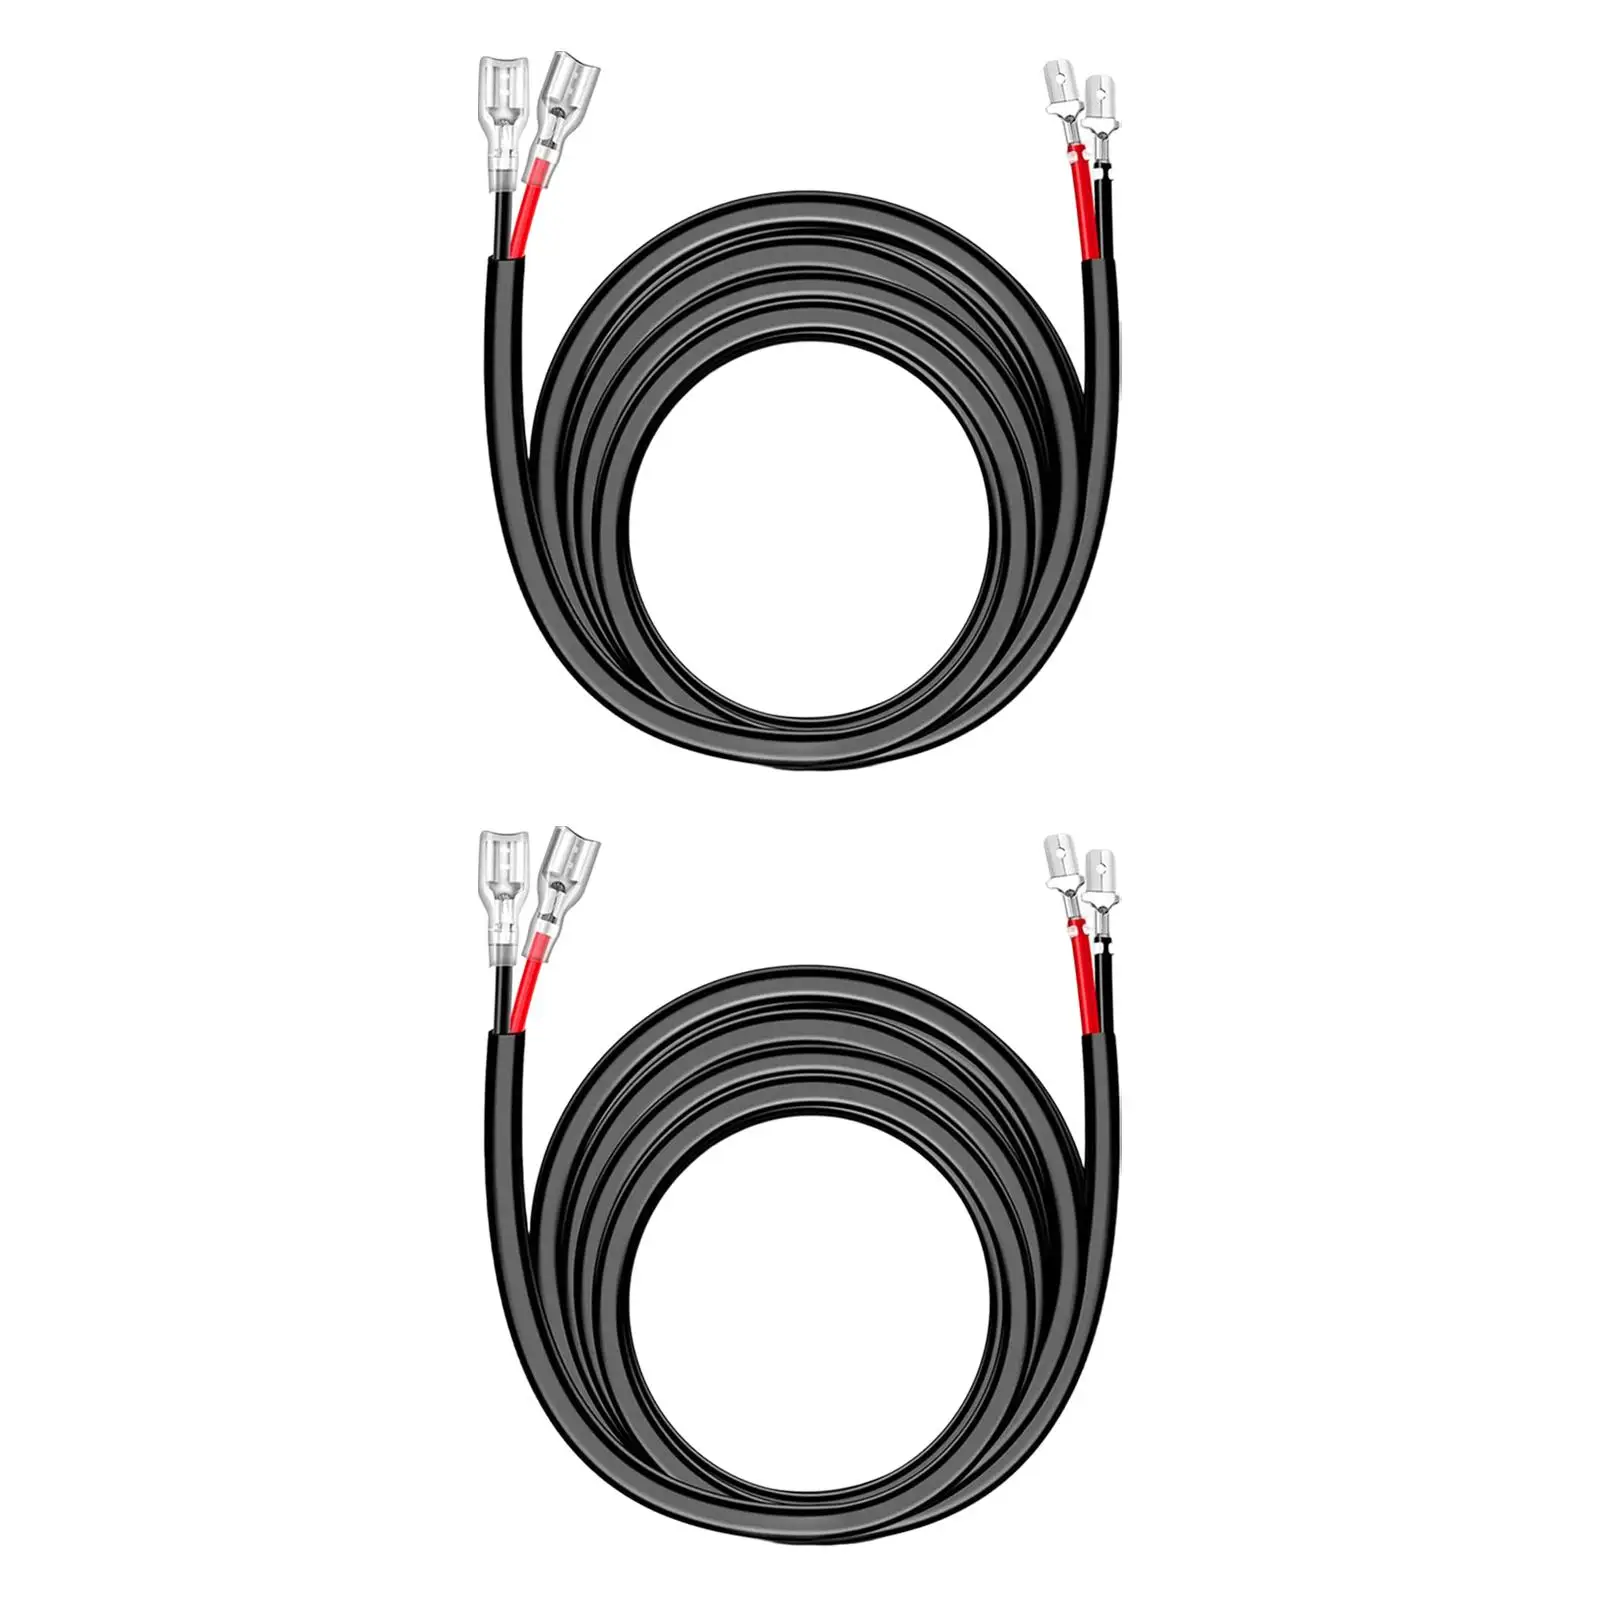 2x Multifunctional Extension Wiring Harness 10ft 16AWG for Work Lamp Lights Boat lighting Replaces Parts